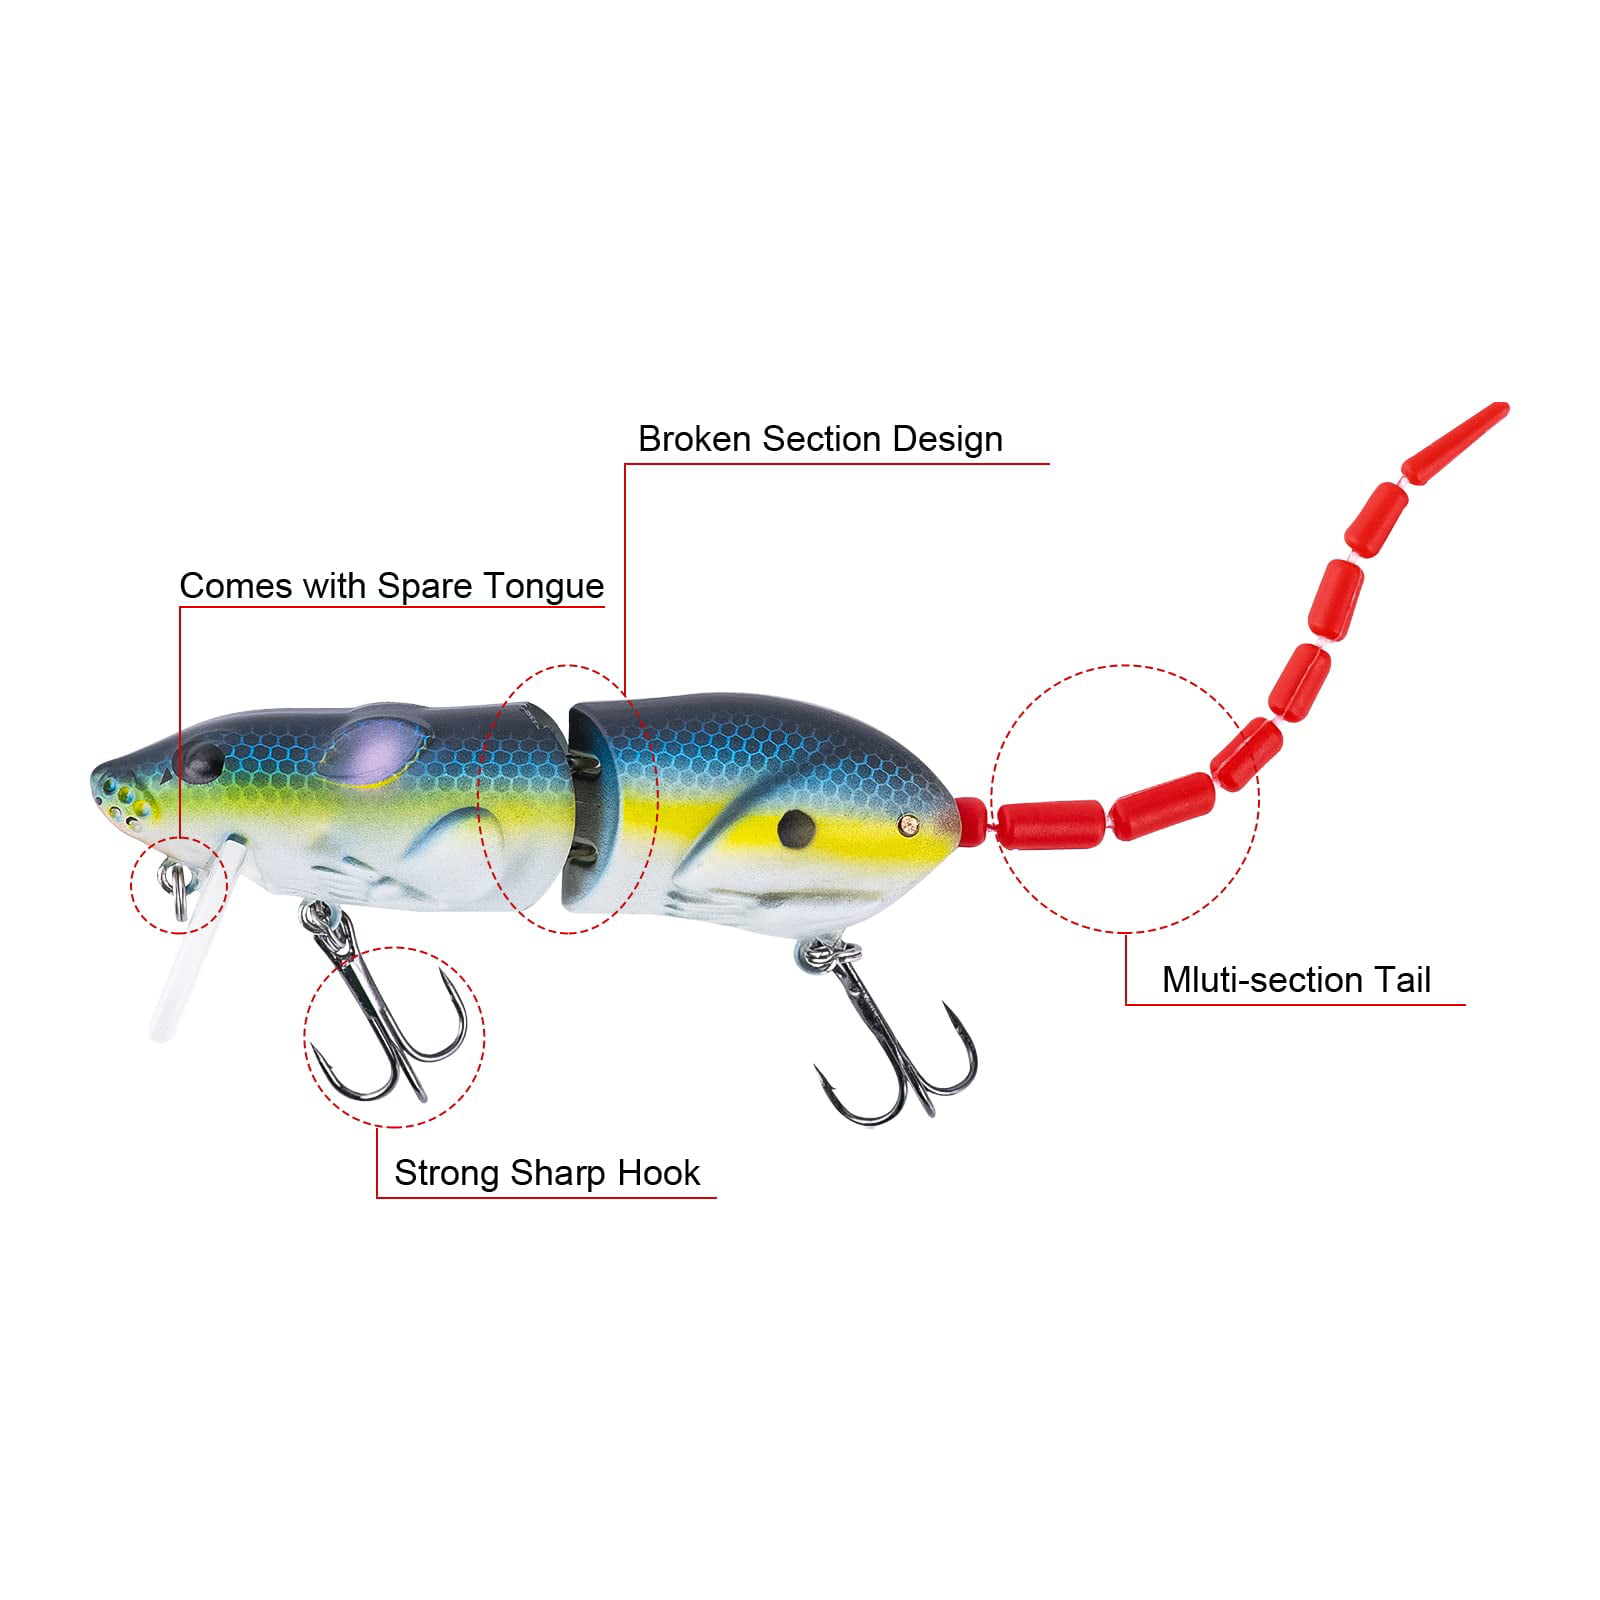 Goture Mice Rat Fishing Lures Topwater 3D Mouse Lures Baits